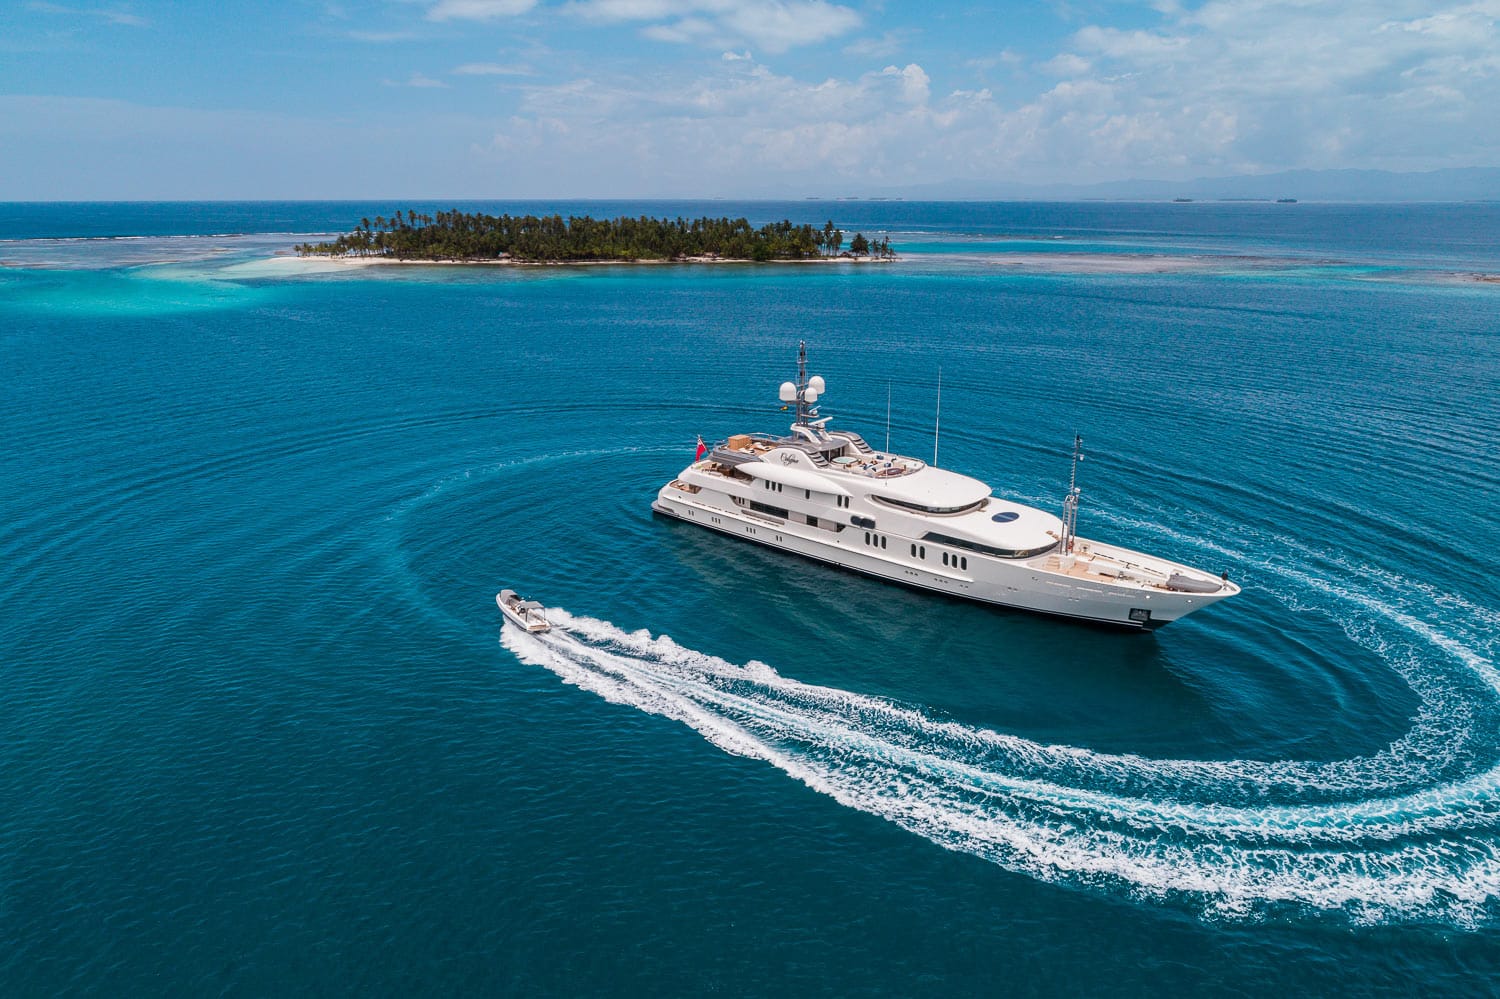 Aerial view of 202ft Amel motor yacht CALYPSO w tender circling boat